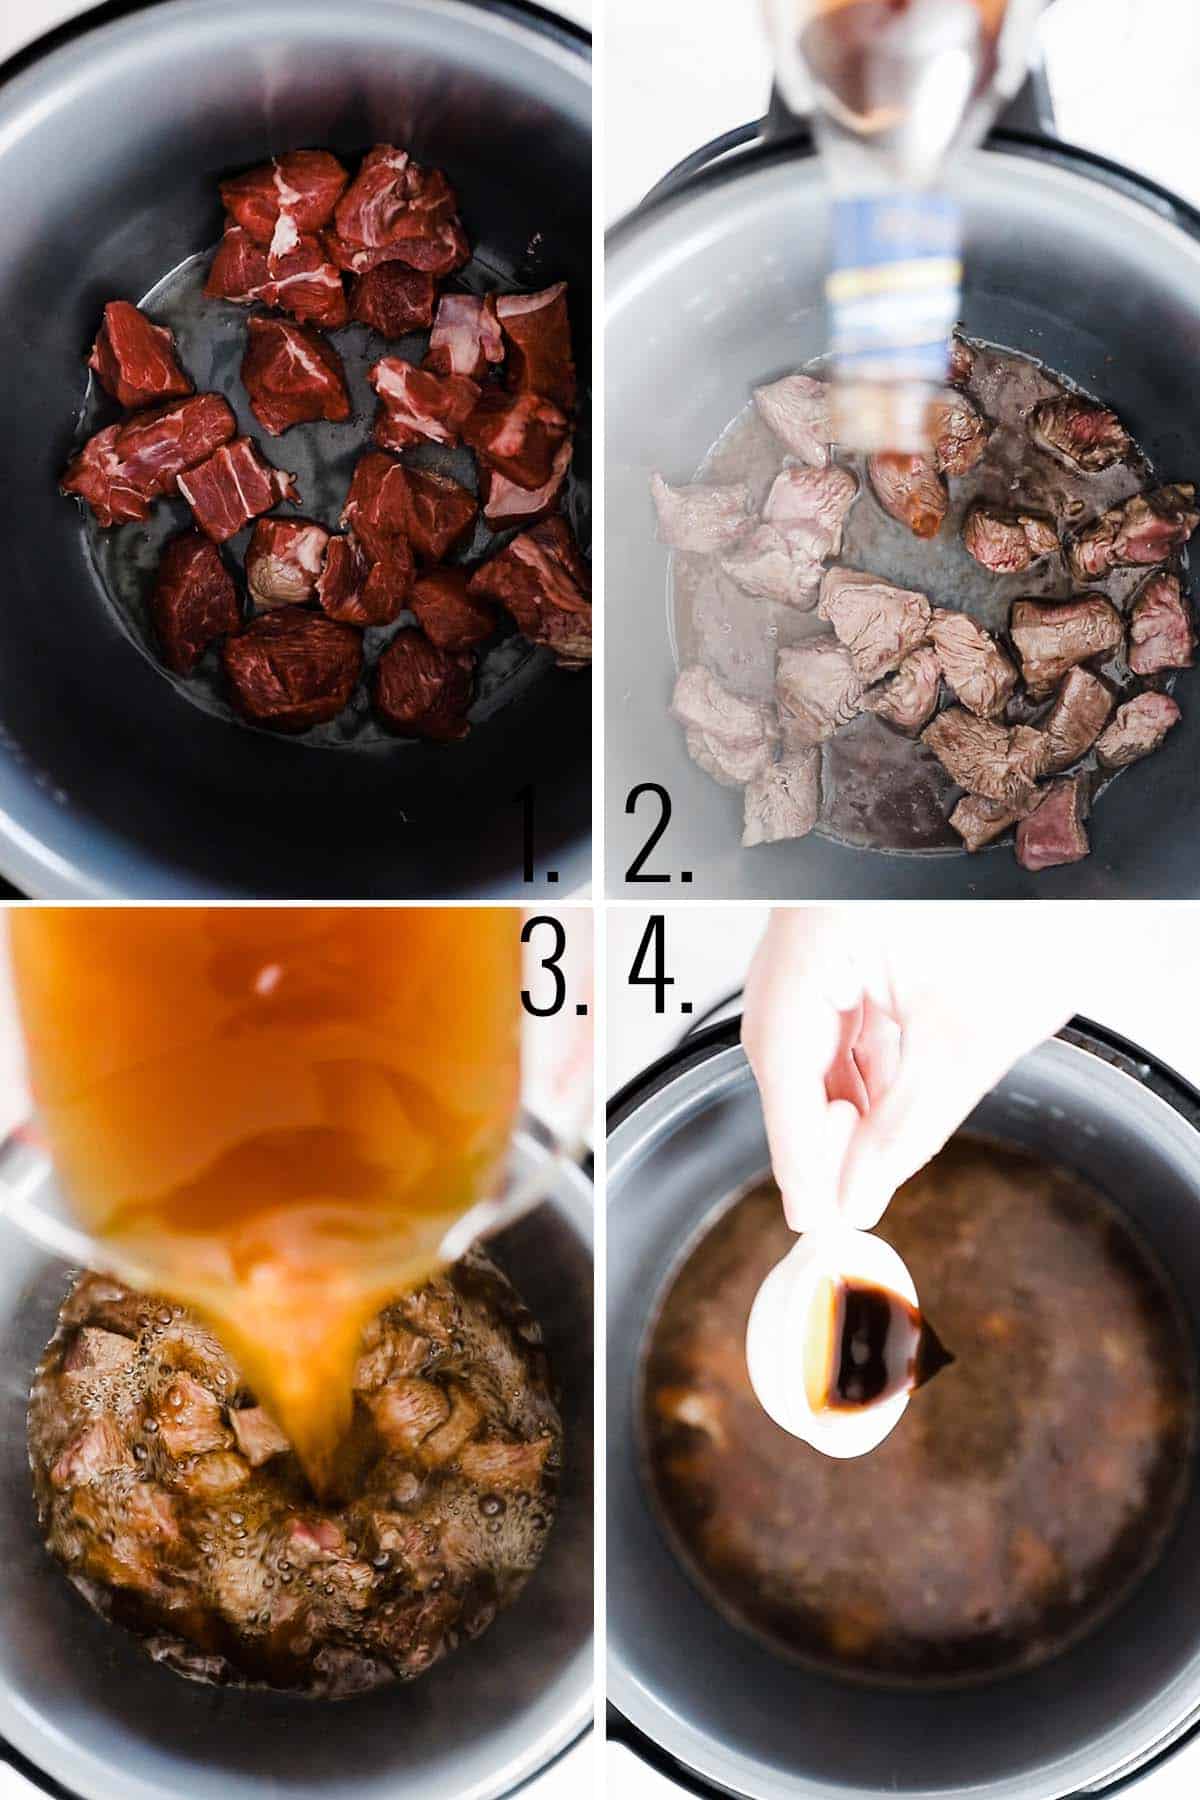 How to make lamb stew.